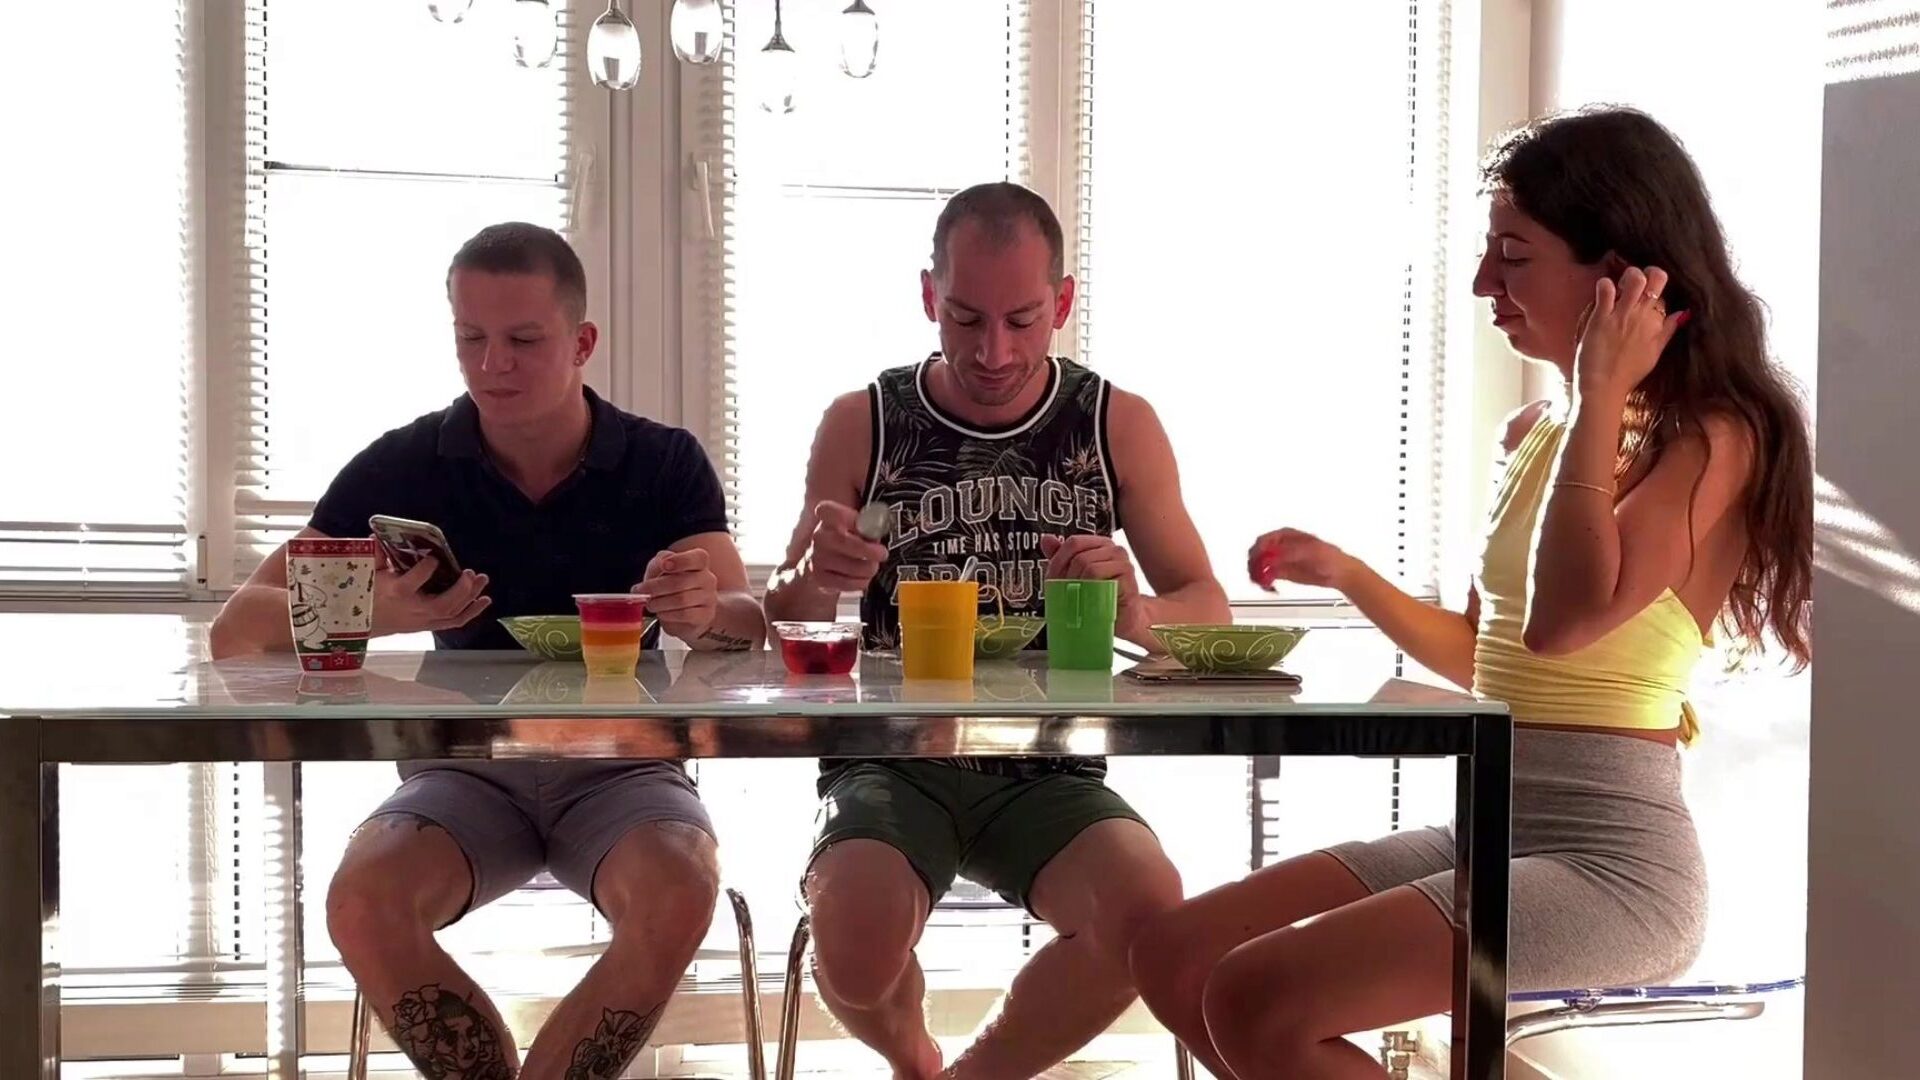 Brother gargled his sister's boyfriend unnoticed at breakfast